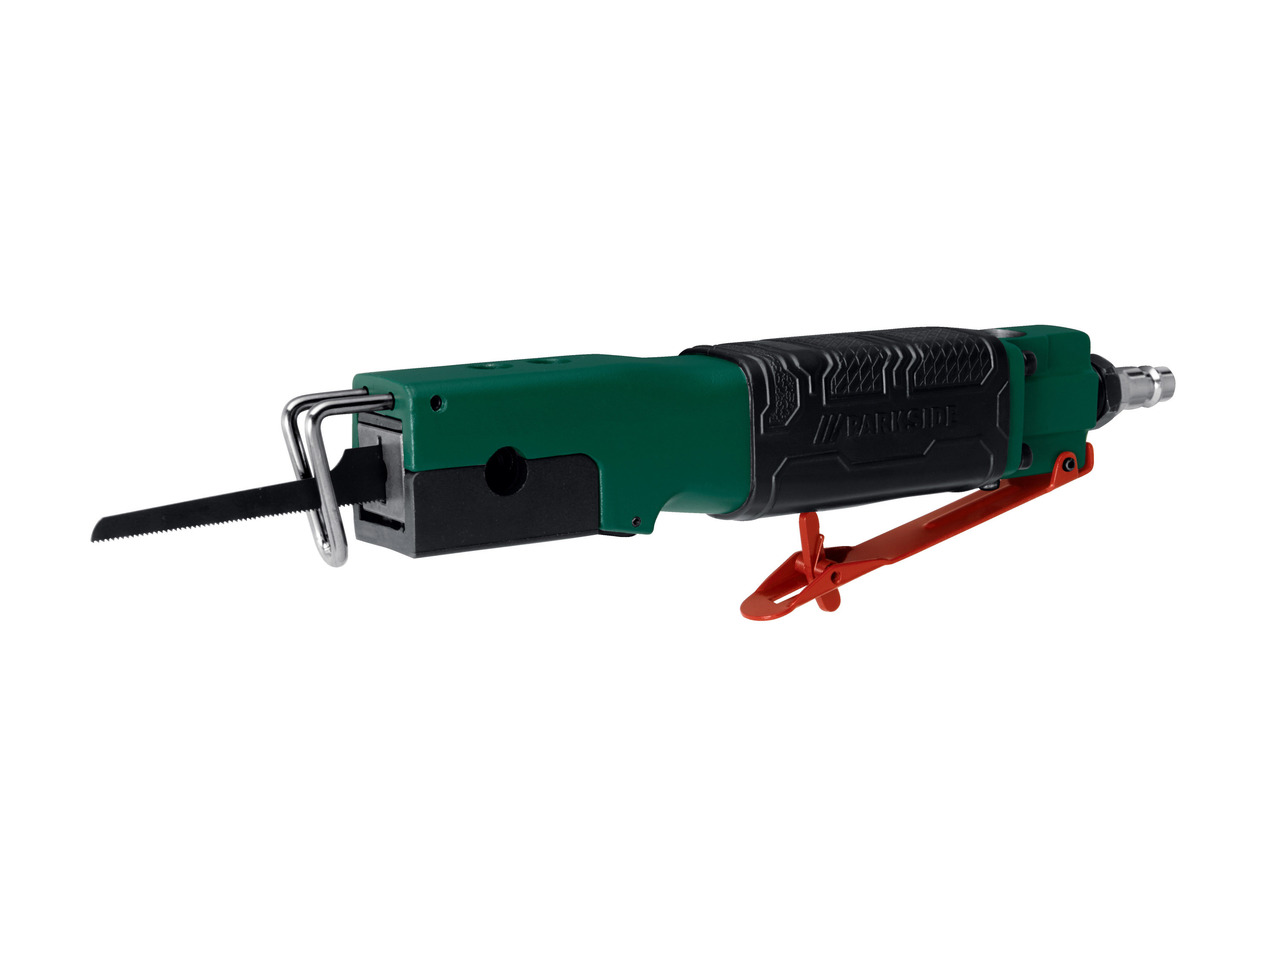 PARKSIDE Pneumatic Drill / Chisel Hammer/ Saw